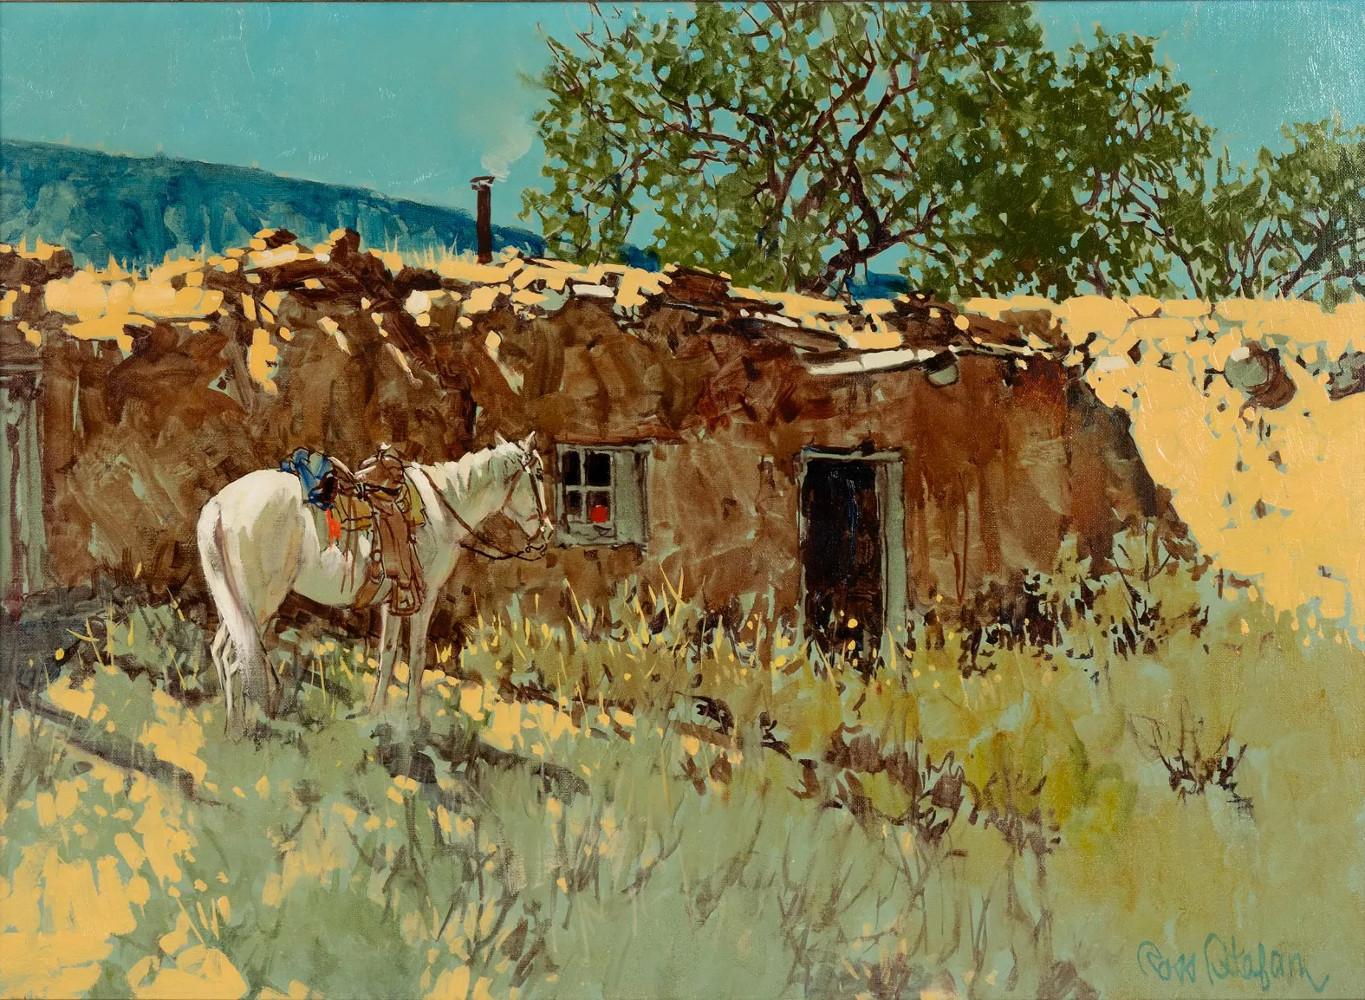 Ross Stefan Landscape Painting - "LUPES, WHITE HORSE" SOUTH OF TAOS, RIO GRANDE RANCH